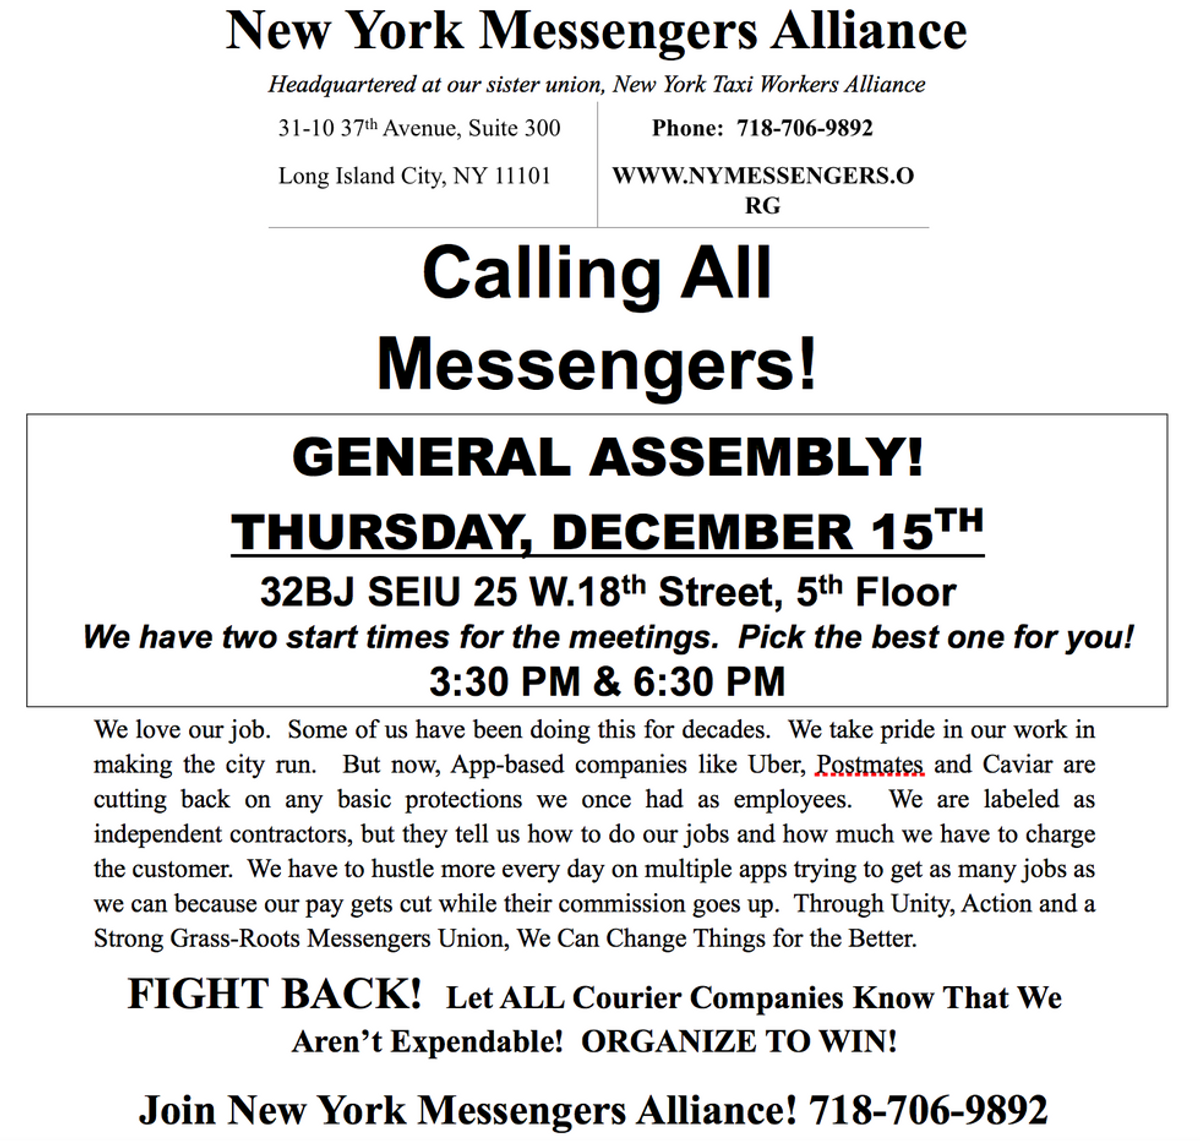 New York Messengers' Alliance General Assembly Meeting!